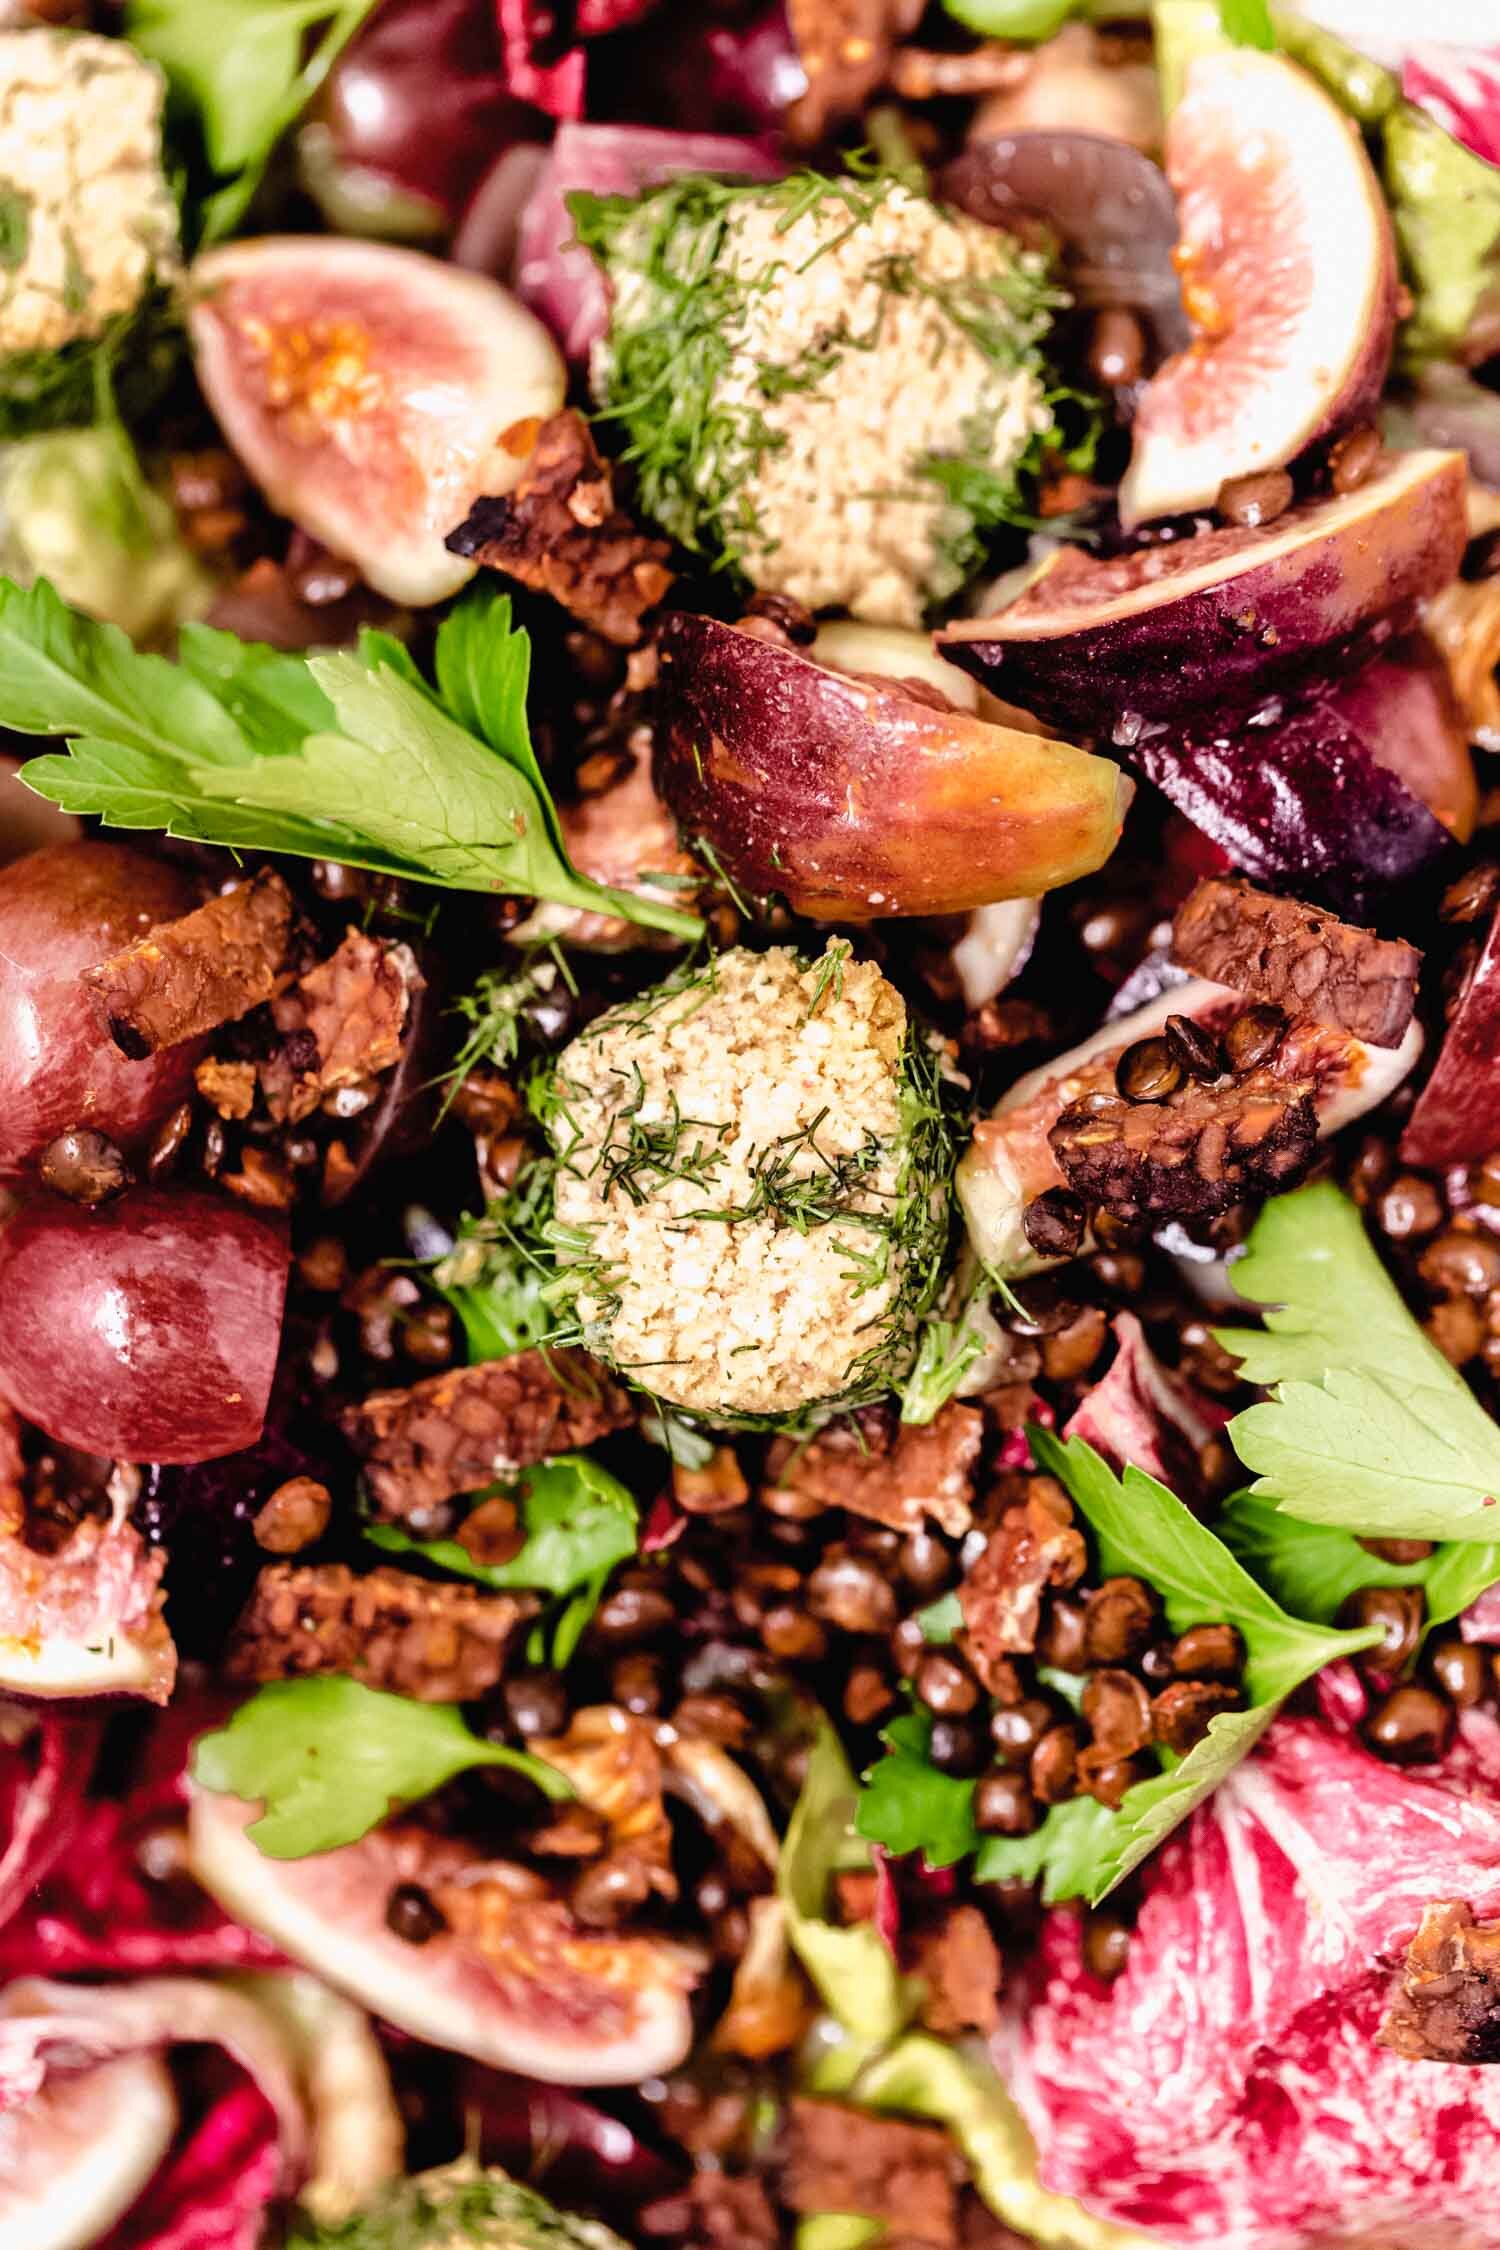 Radicchio Harvest Salad with Pecan Dressing (Vegan, GF) is a full holiday meal in itself, yet makes a crowd-pleasing plant-based addition to a holiday spread. #veganholiday #plantbasedrecipe #thanksgiving #christmas #holidaysalad #radicchio #vegancheese #lentils #wildrice #veganbacon #figrecipe #pecan #vegansalad #harvestsalad #thanksgivingsalad #colorfulsalad #glutenfreeholiday